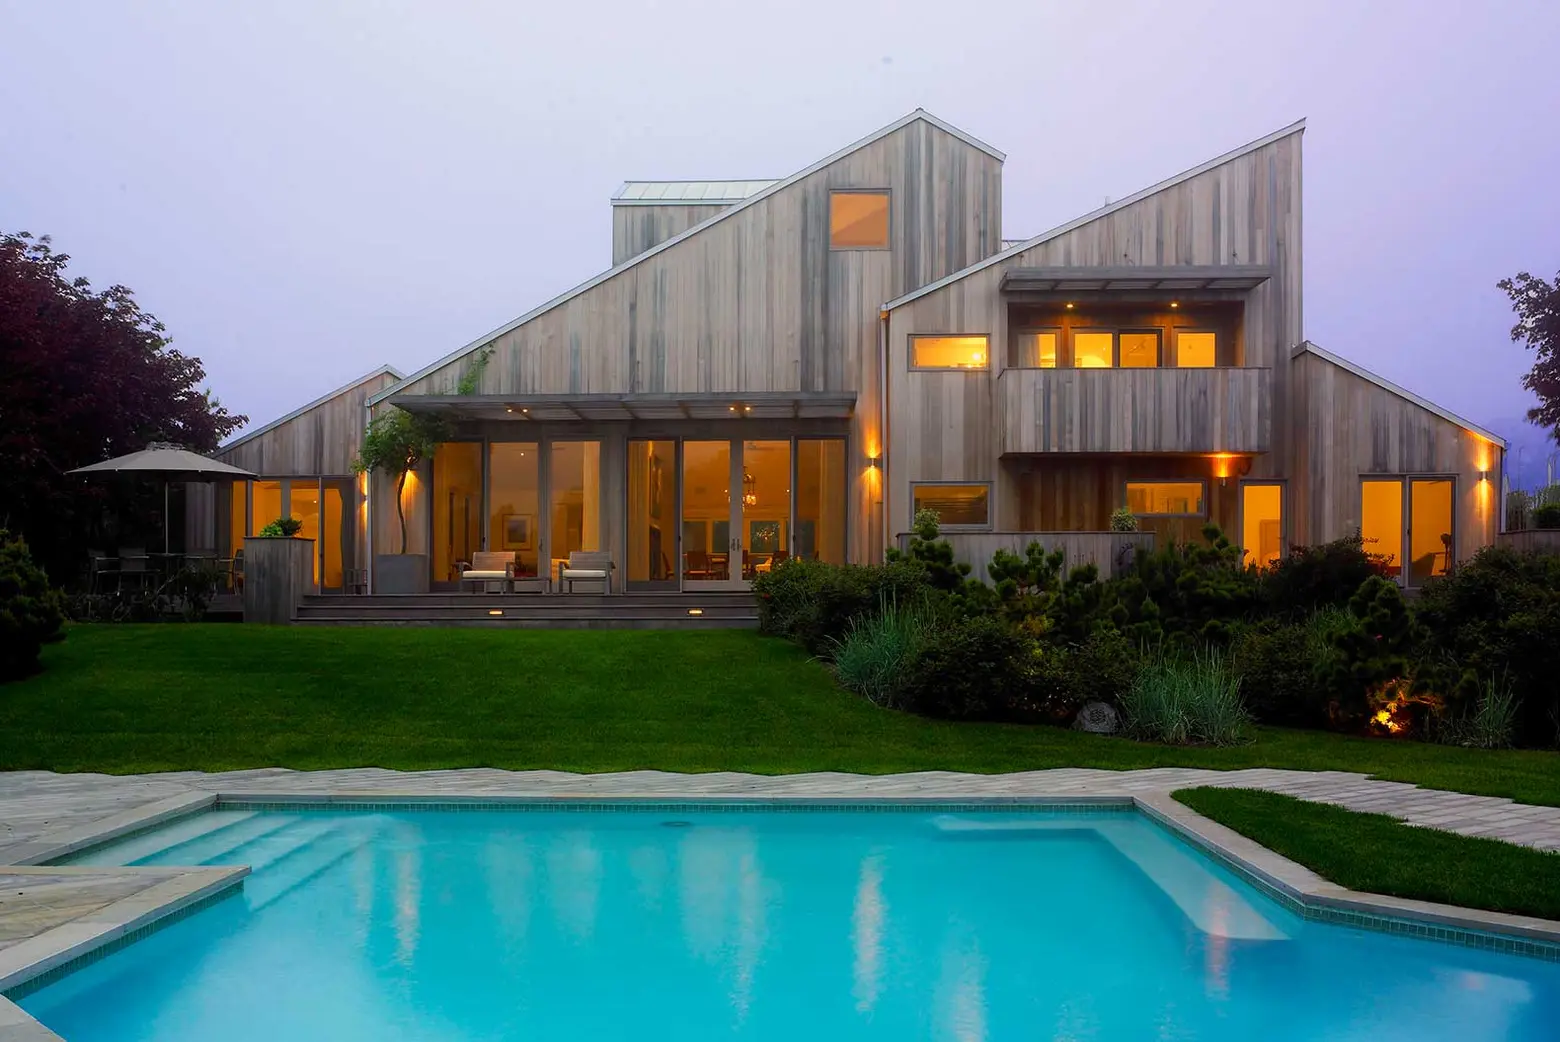 CCS Architecture, wood clad, Bridgehampton Residence, The Hamptons, multigenerational home, indoor/outdoor living, wooden deck, secluded entrance, eating al fresco, Cass Calder Smith founded, modernist home, house extension, house renovation